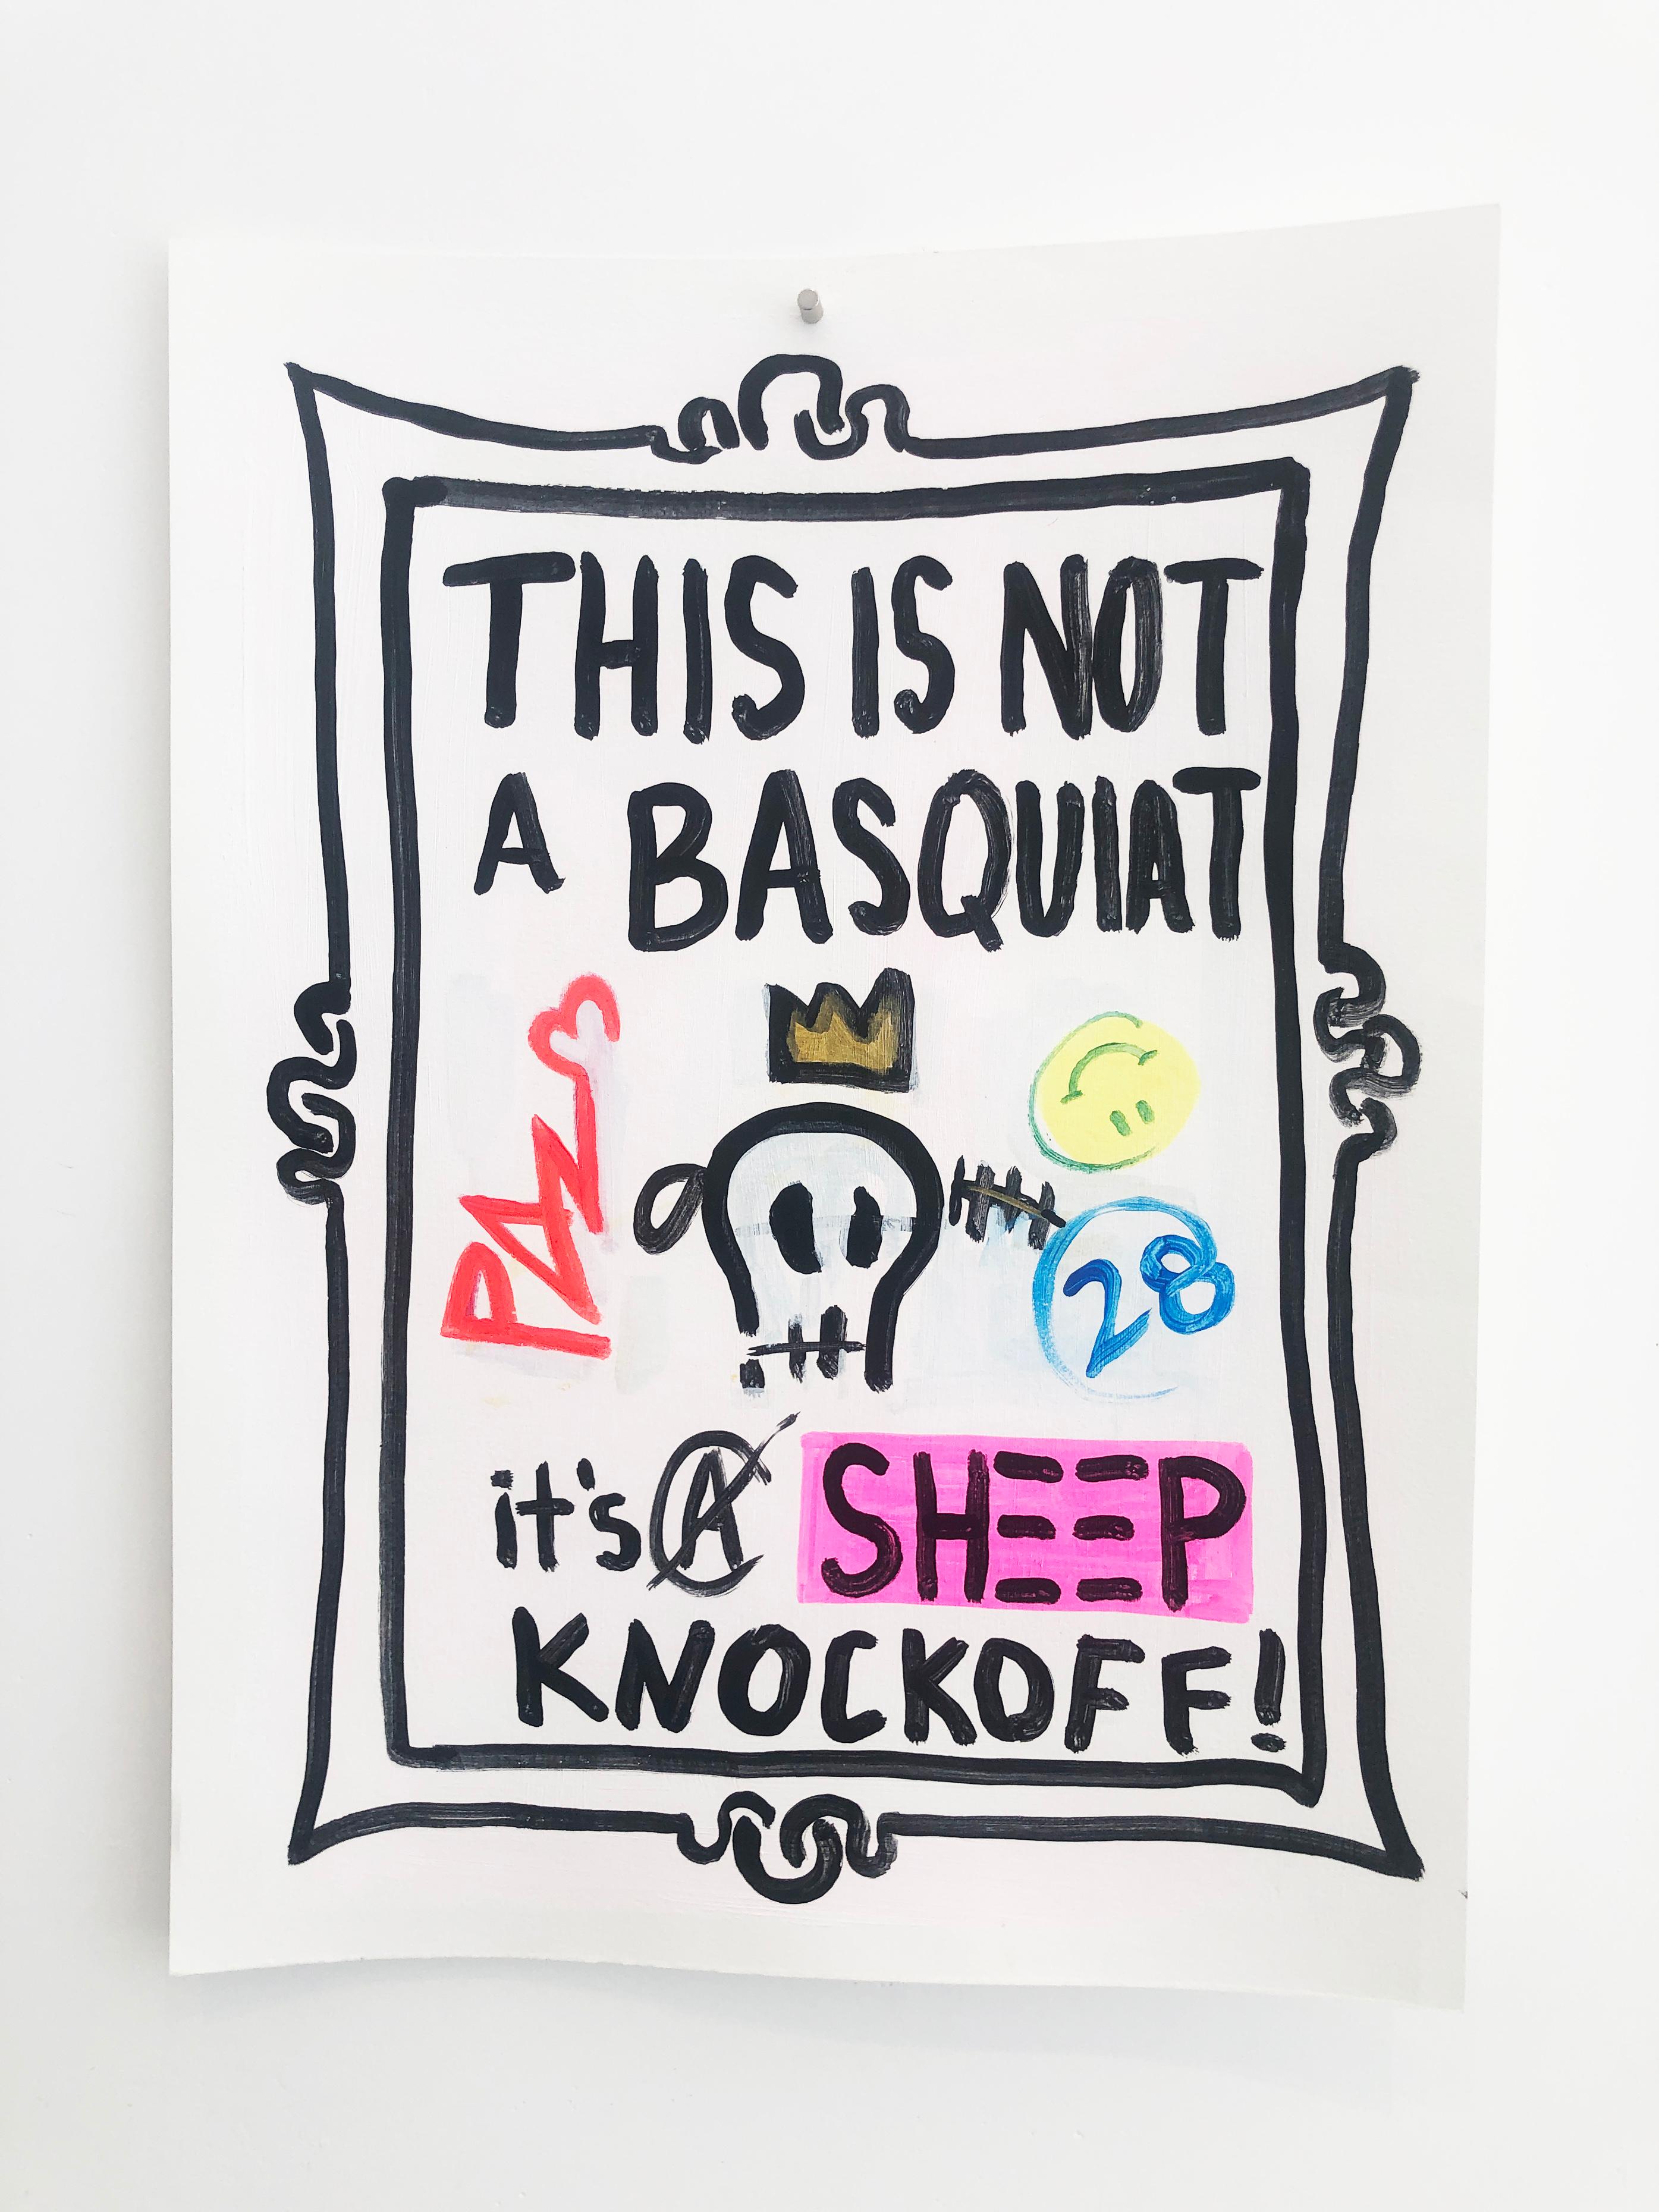 It's a Knockoff - Basquiat  acrylic on paper - Painting by Little Ricky